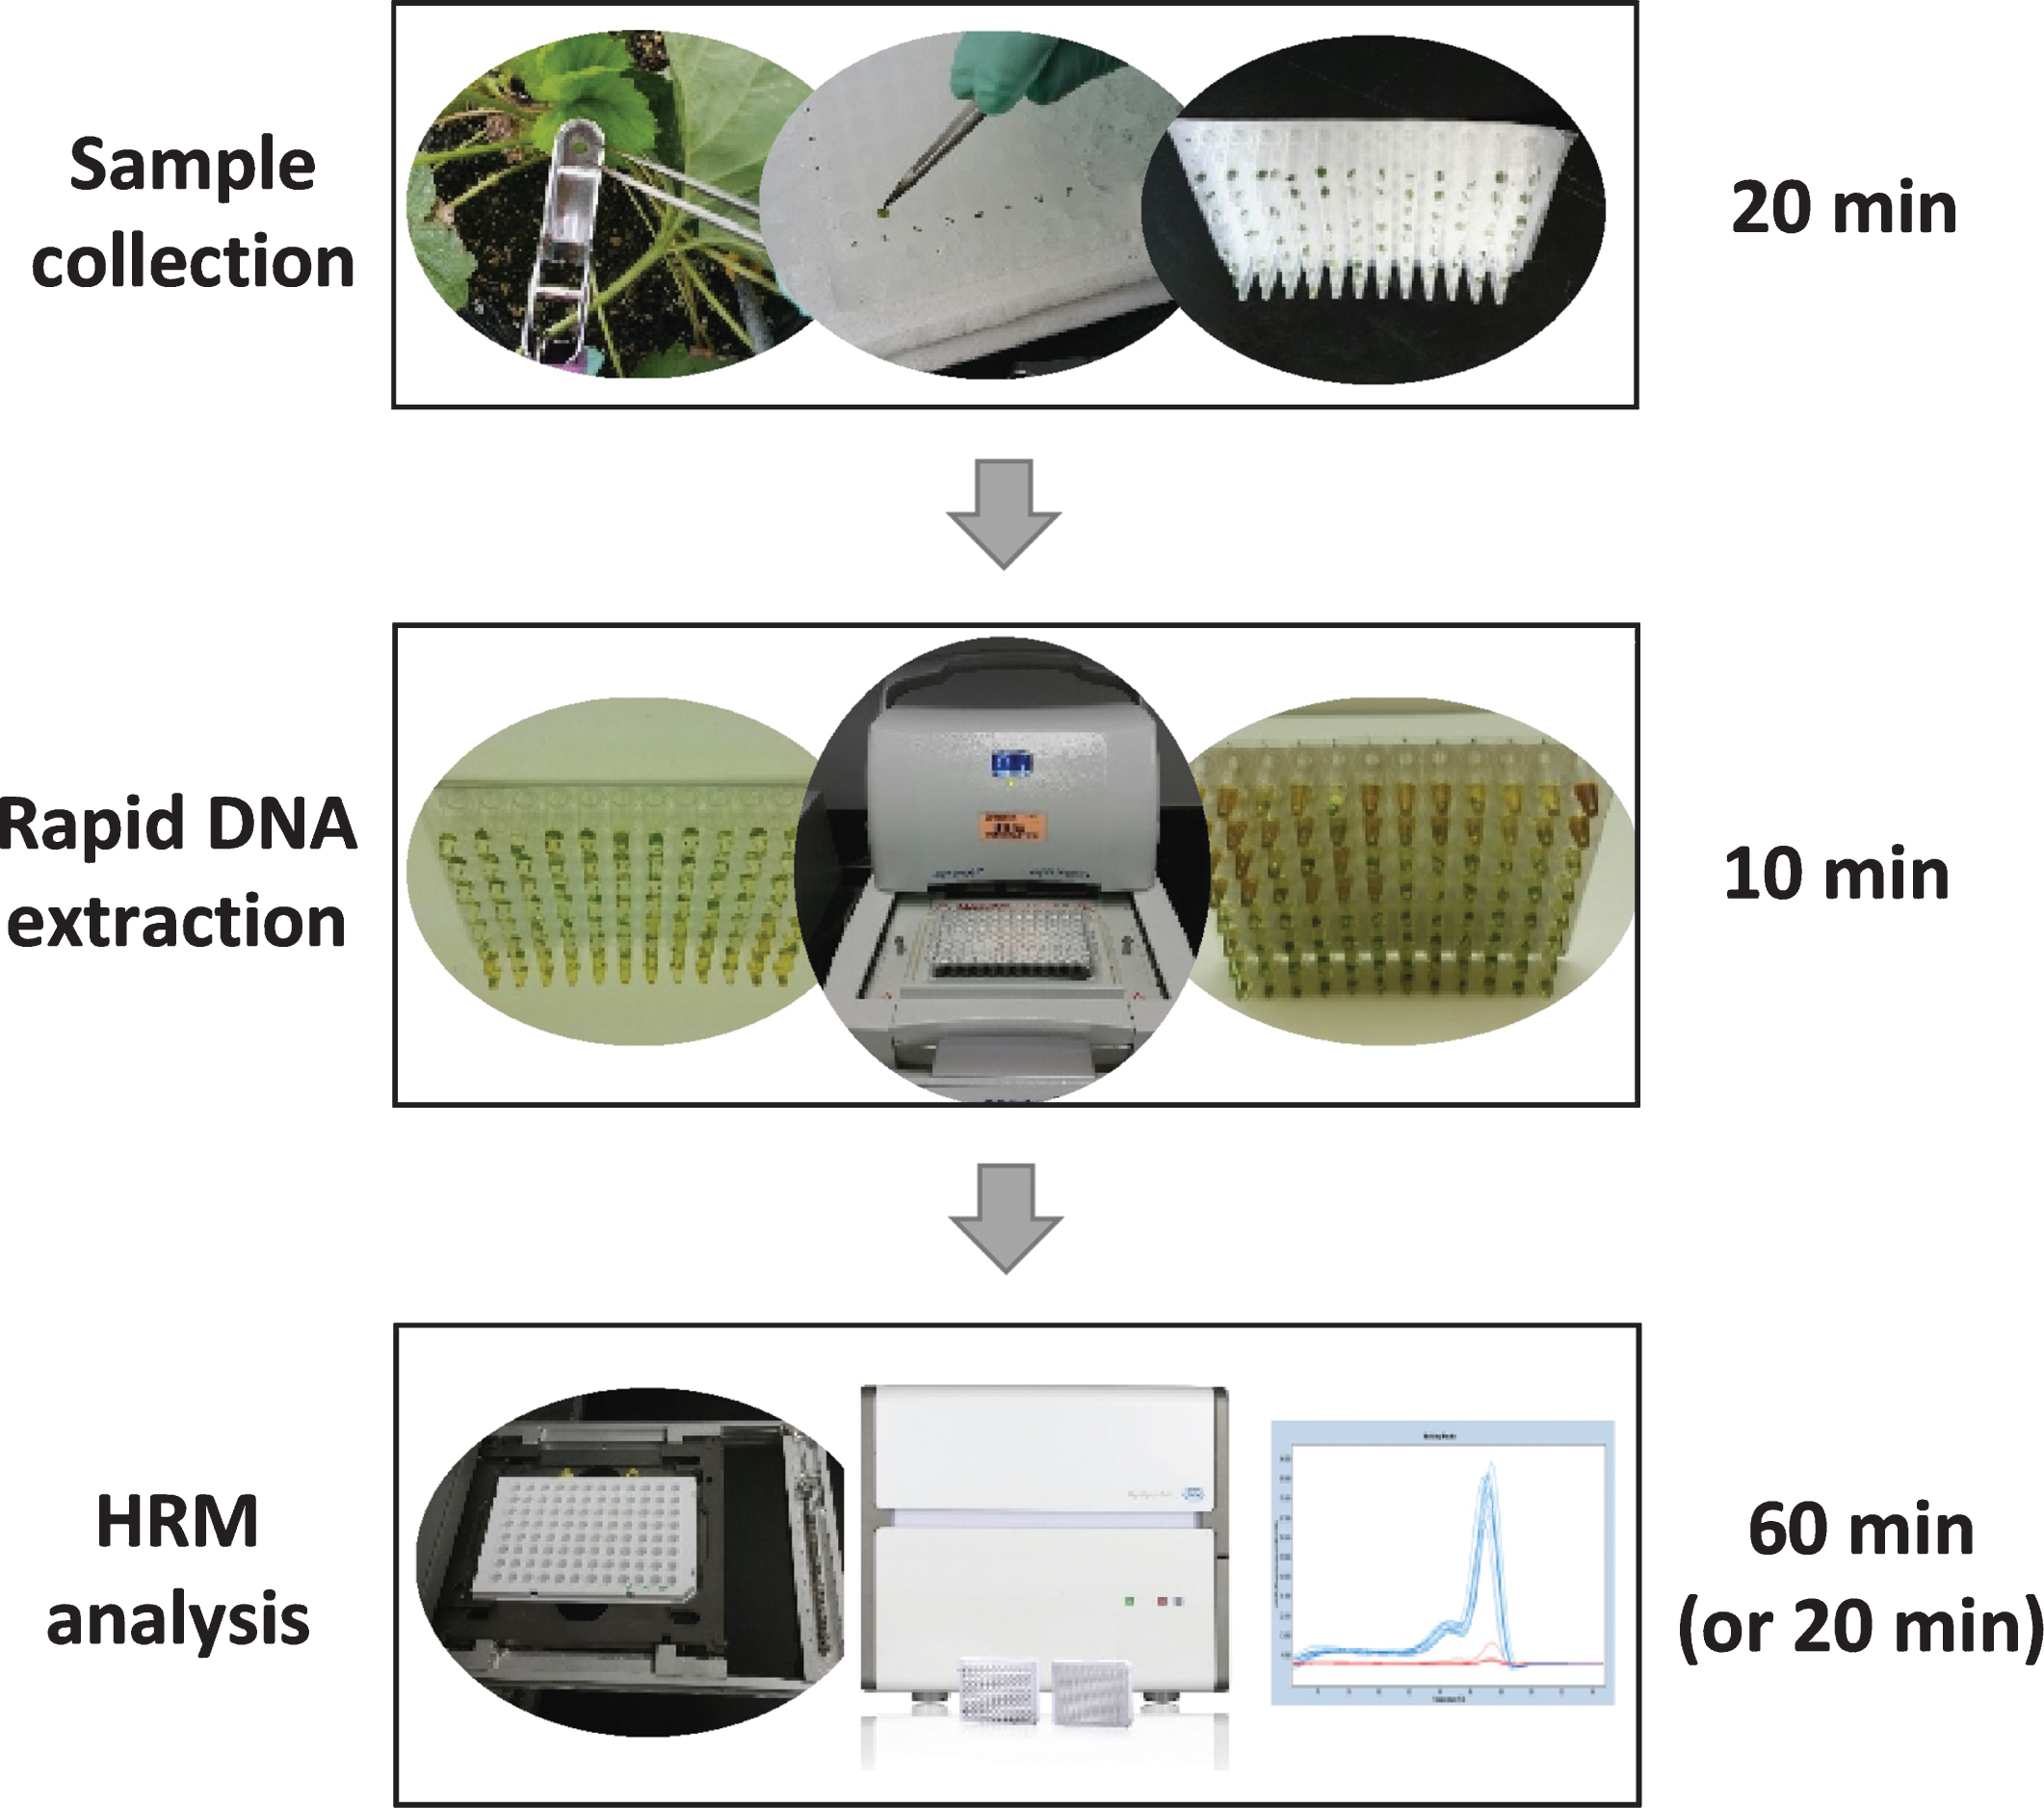 Summary schematic of a high-throughput genotyping system developed for strawberry and other Rosaceae crop breeding programs. Instead of using four leaf discs, we only collected one leaf disc (3 mm) in each well of a 96-well PCR plate and incubated 10 min with the extraction buffer in a PCR thermocycler. The crude DNA sample is diluted (2-fold for a single disc, or at least 5-fold when four leaf discs were used) with dilution buffer, and directly used for PCR amplification and HRM analysis using a LightCycler 480 system II. The total procedure, for either 96 or 384 format, can be completed in 2 to 3 hours. The procedure for the HRM scan of a 384-well plate (without PCR amplification) can be done in 20 min.